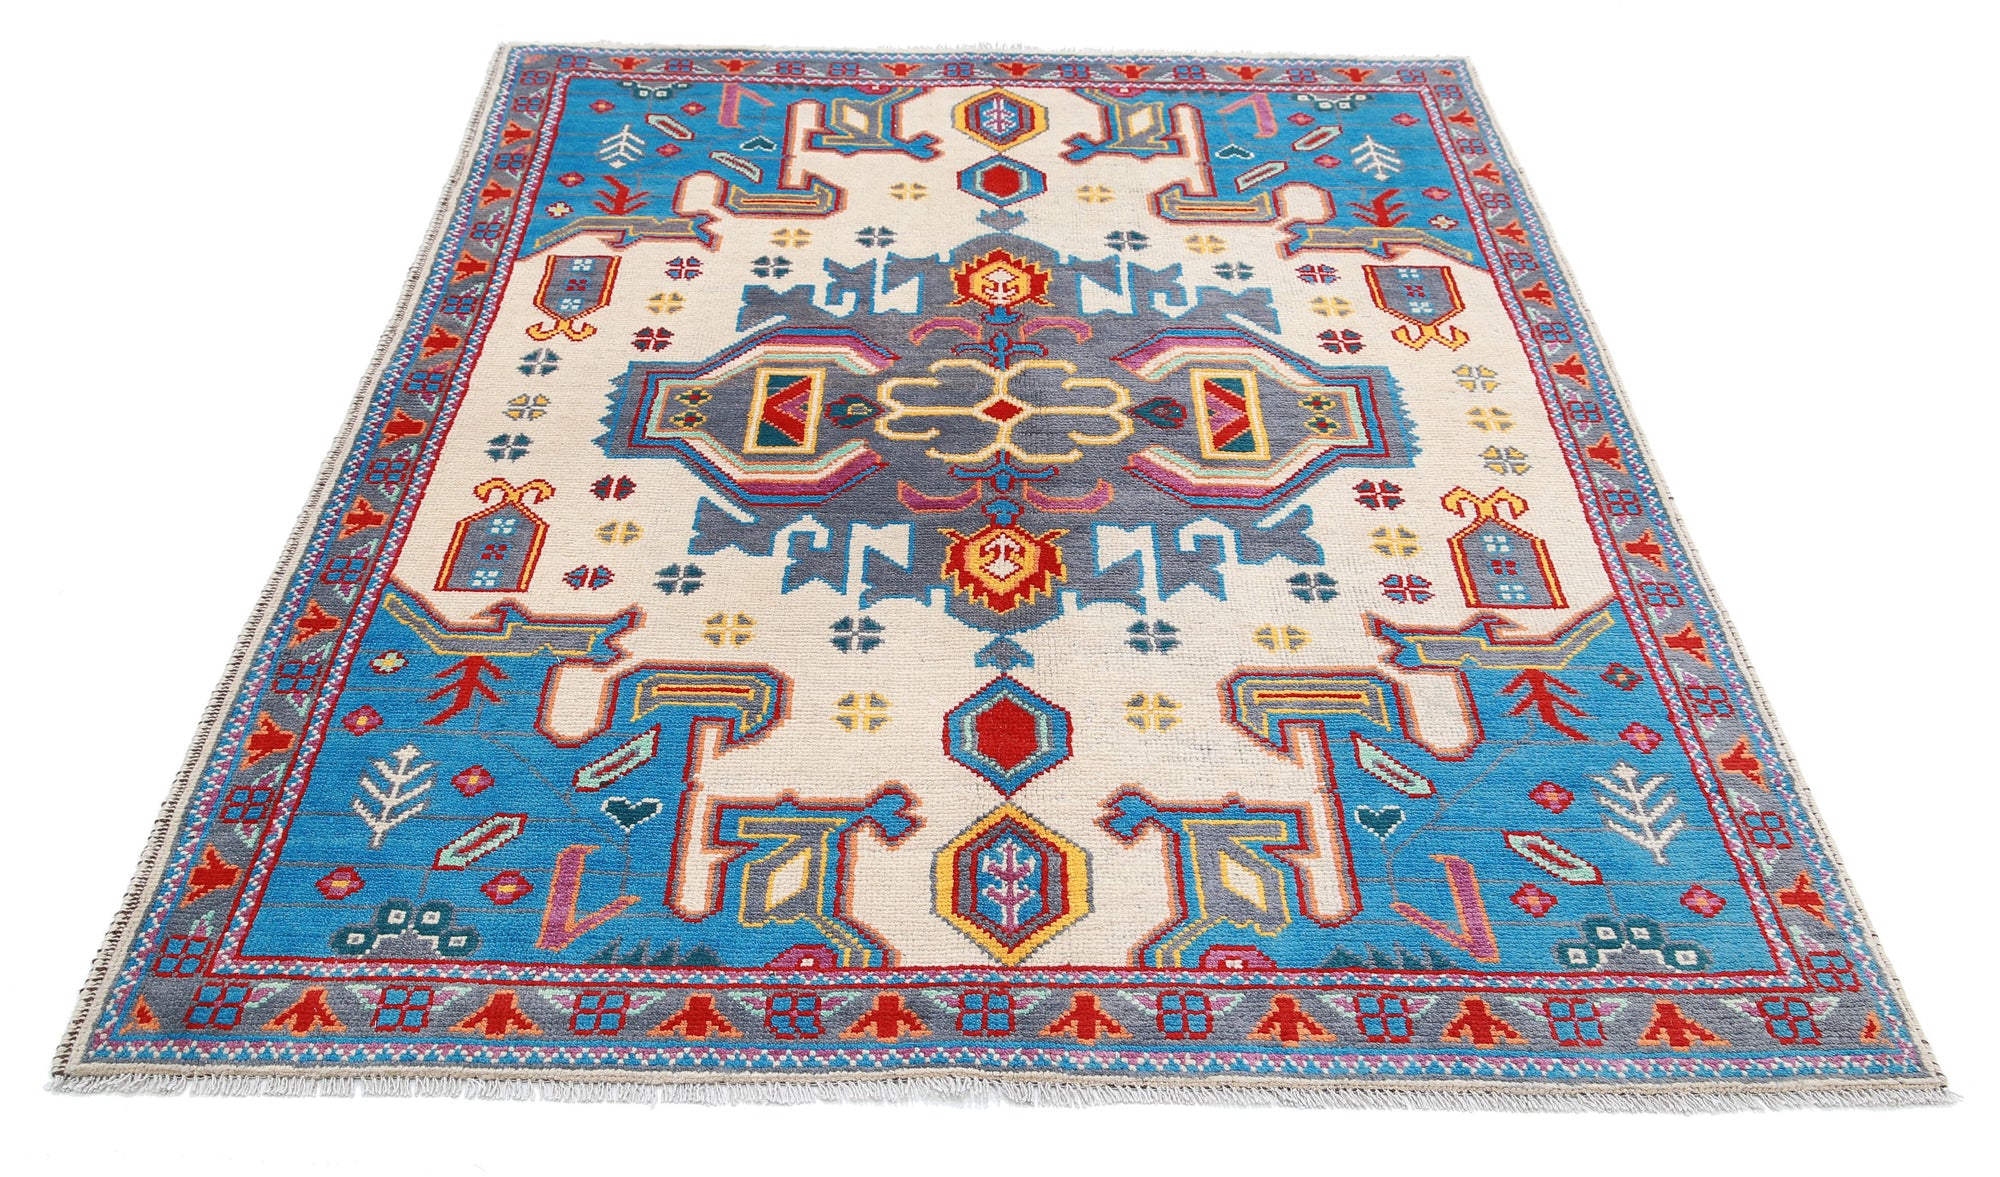 Revival-hand-knotted-qarghani-wool-rug-5014083-3.jpg